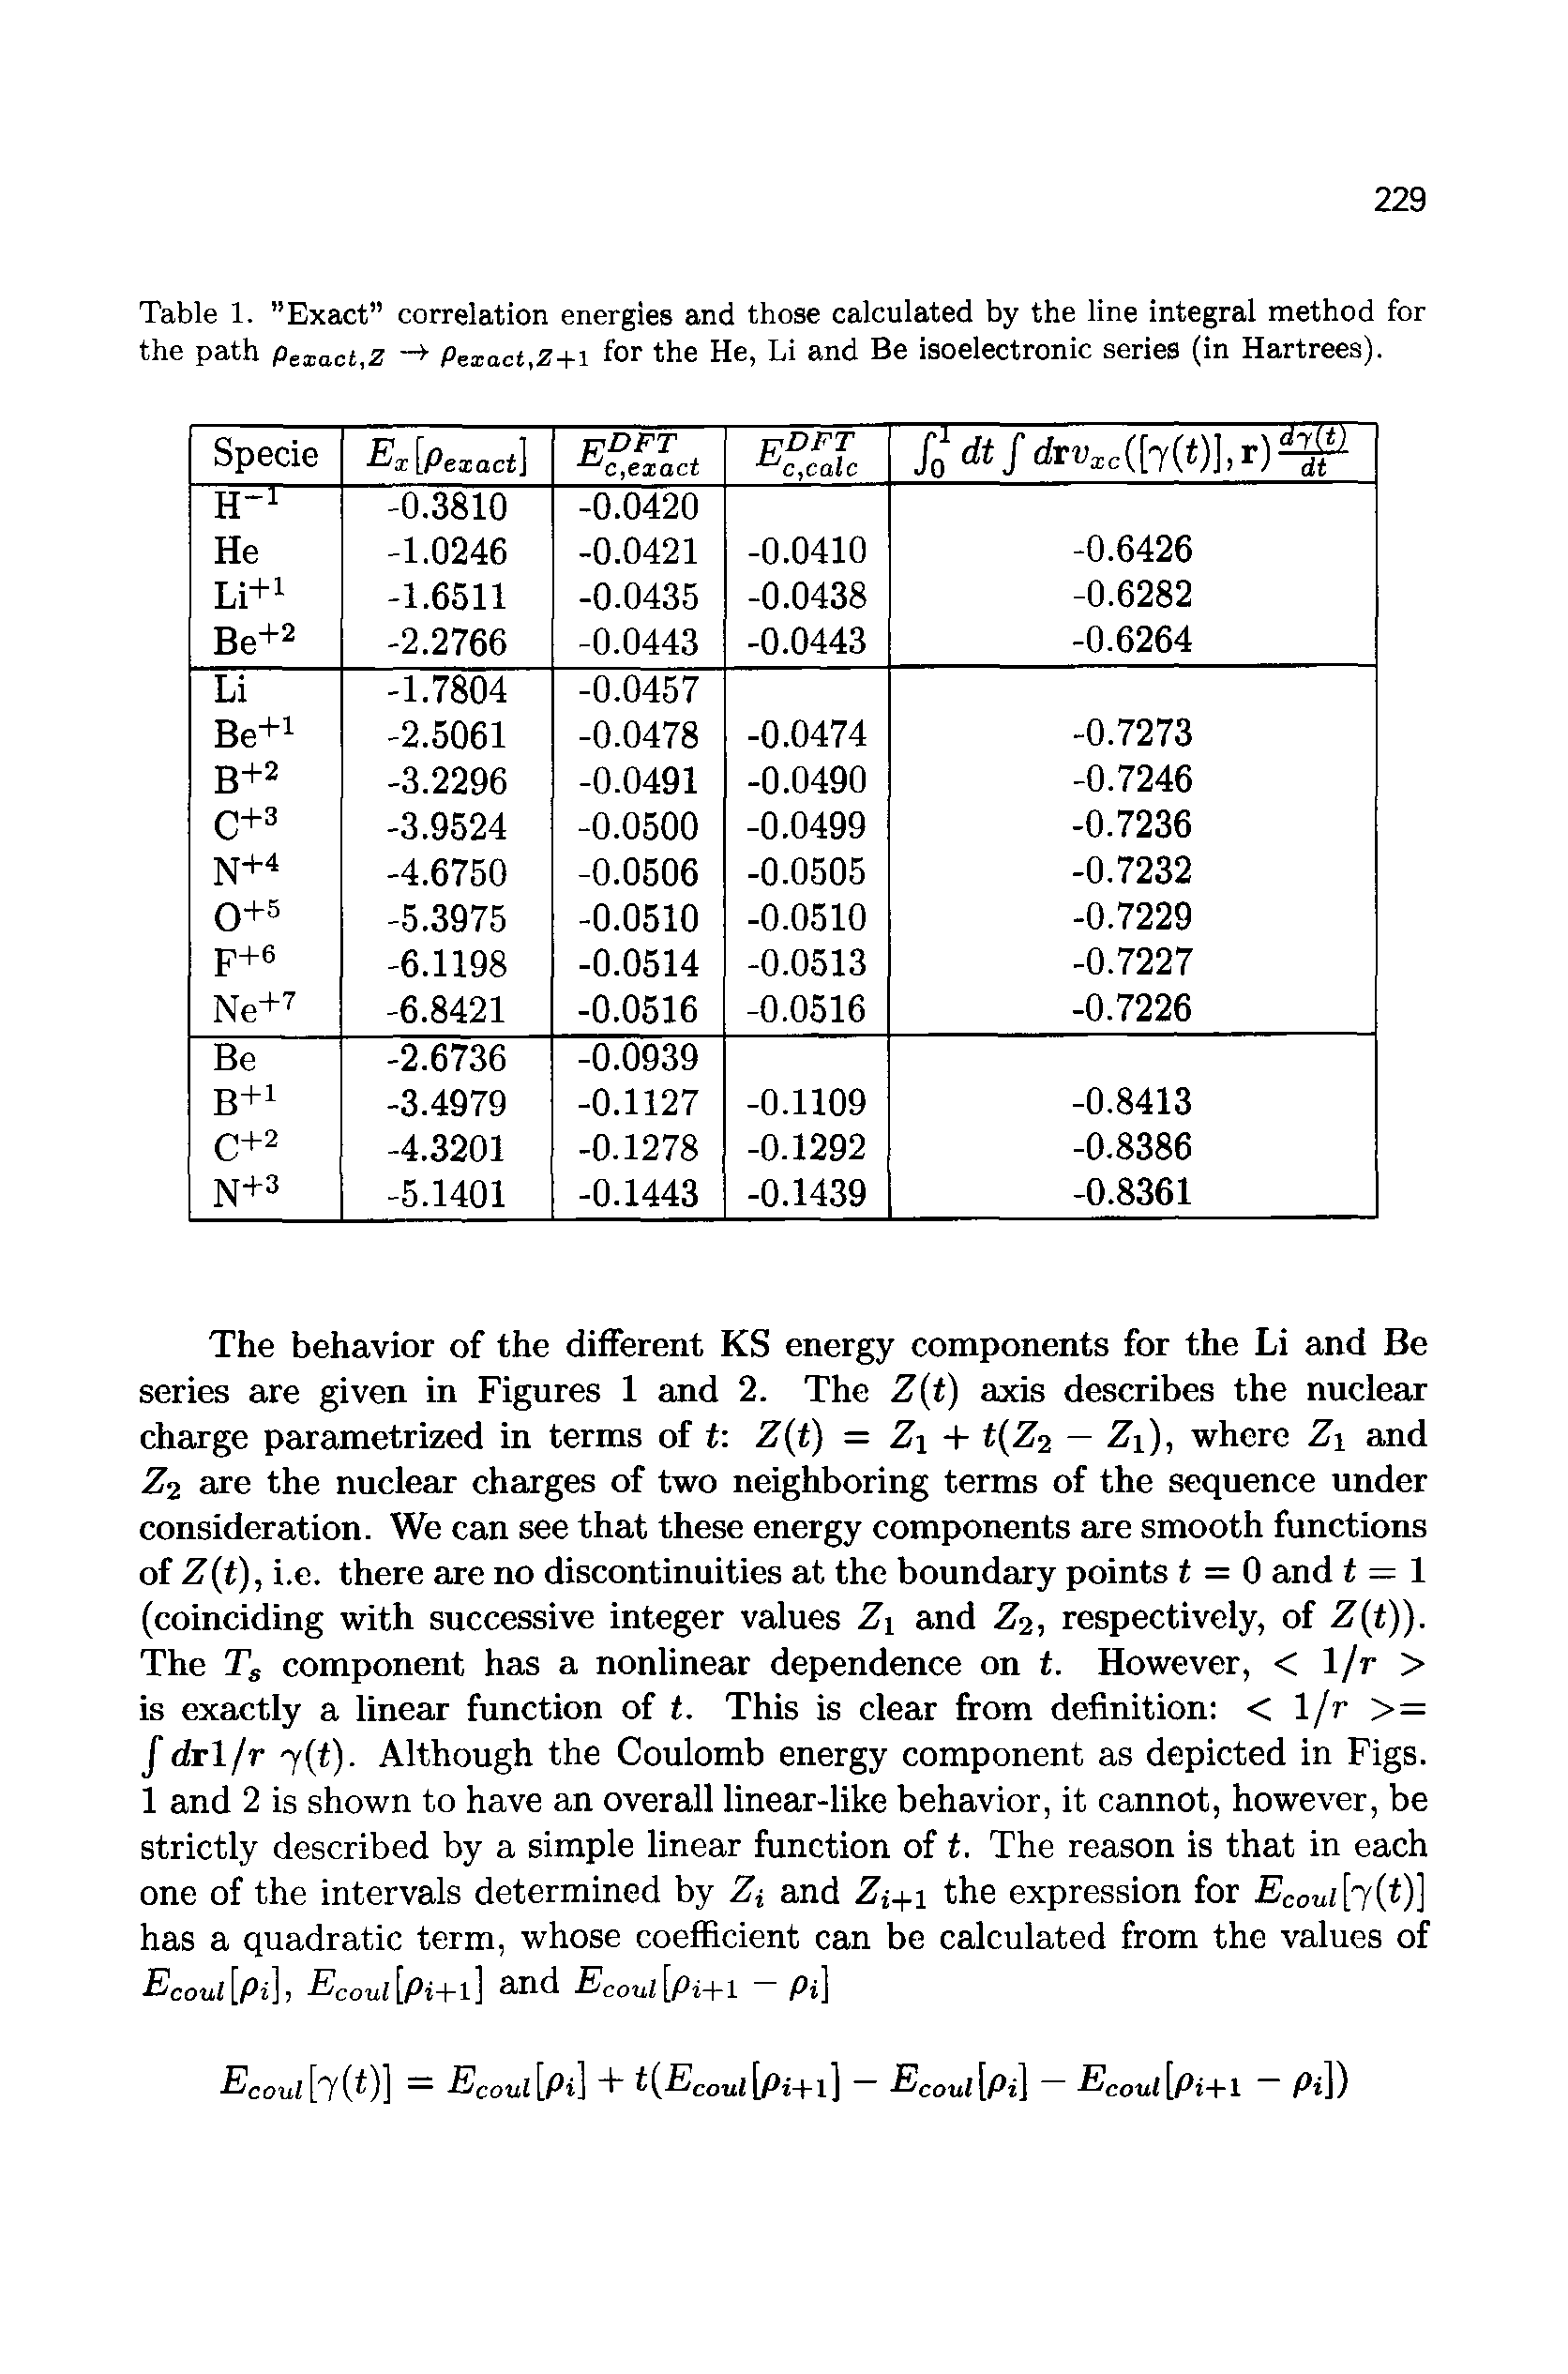 Table 1. "Exact correlation energies and those calculated by the line integral method for the path pexact,z Pexact,z+i for the He, Li and Be isoelectronic series (in Hartrees).